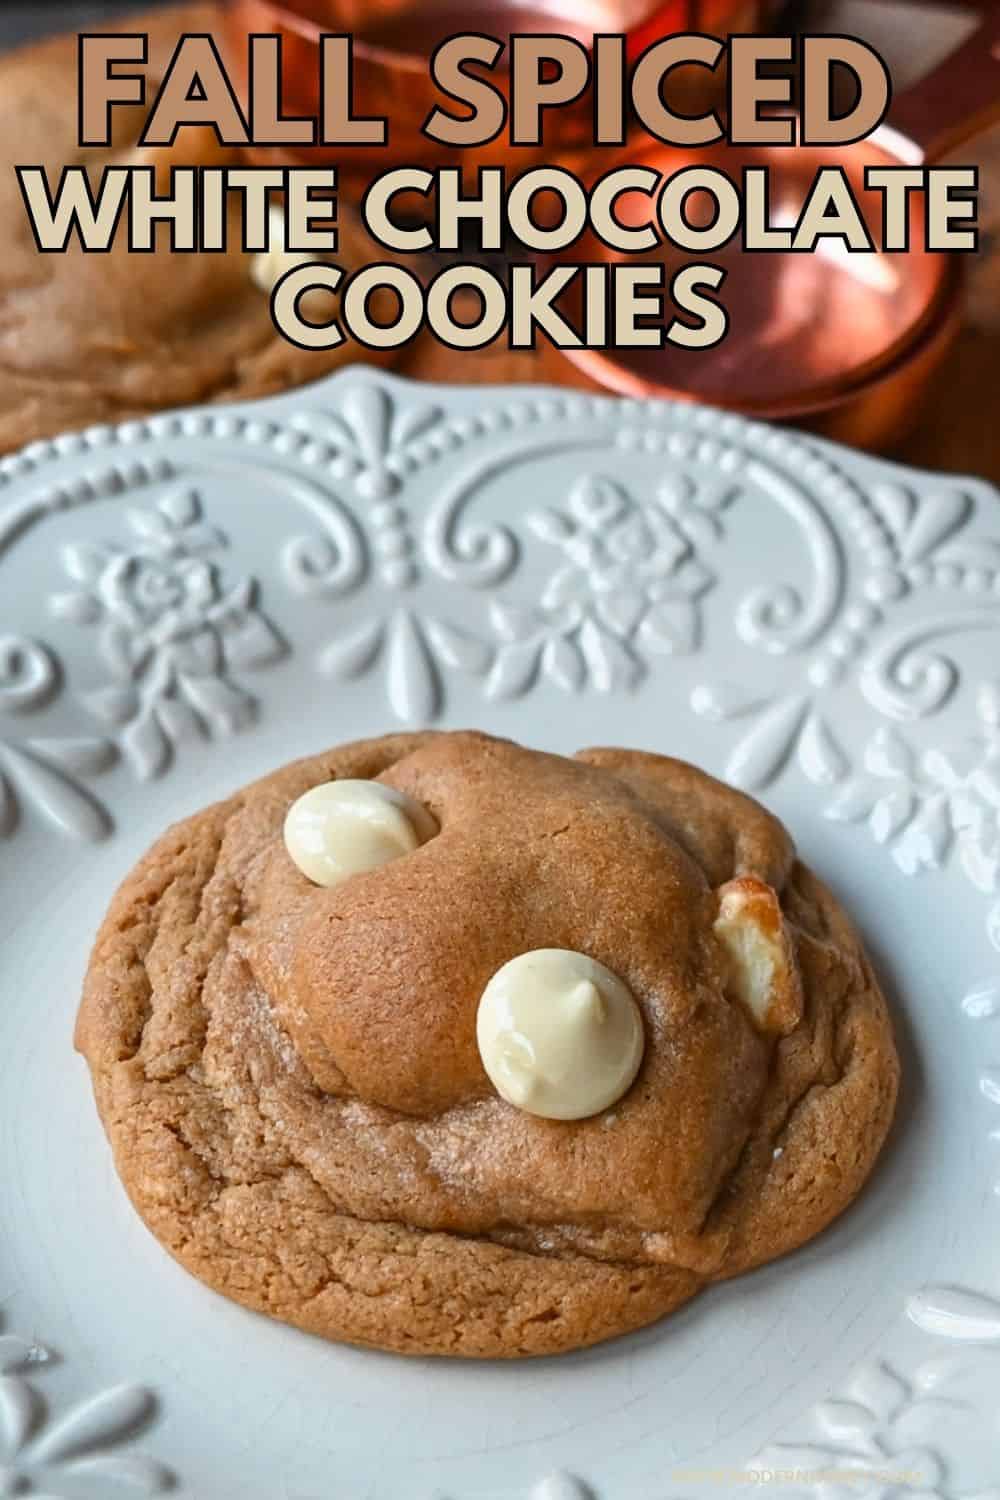 Spice White Chocolate Cookies. This Fall warm spiced cookie with white chocolate chips just screams Fall flavors. The warm spiced cookie made with cinnamon, ginger, nutmeg, and cloves pairs perfectly with decadent white chocolate.